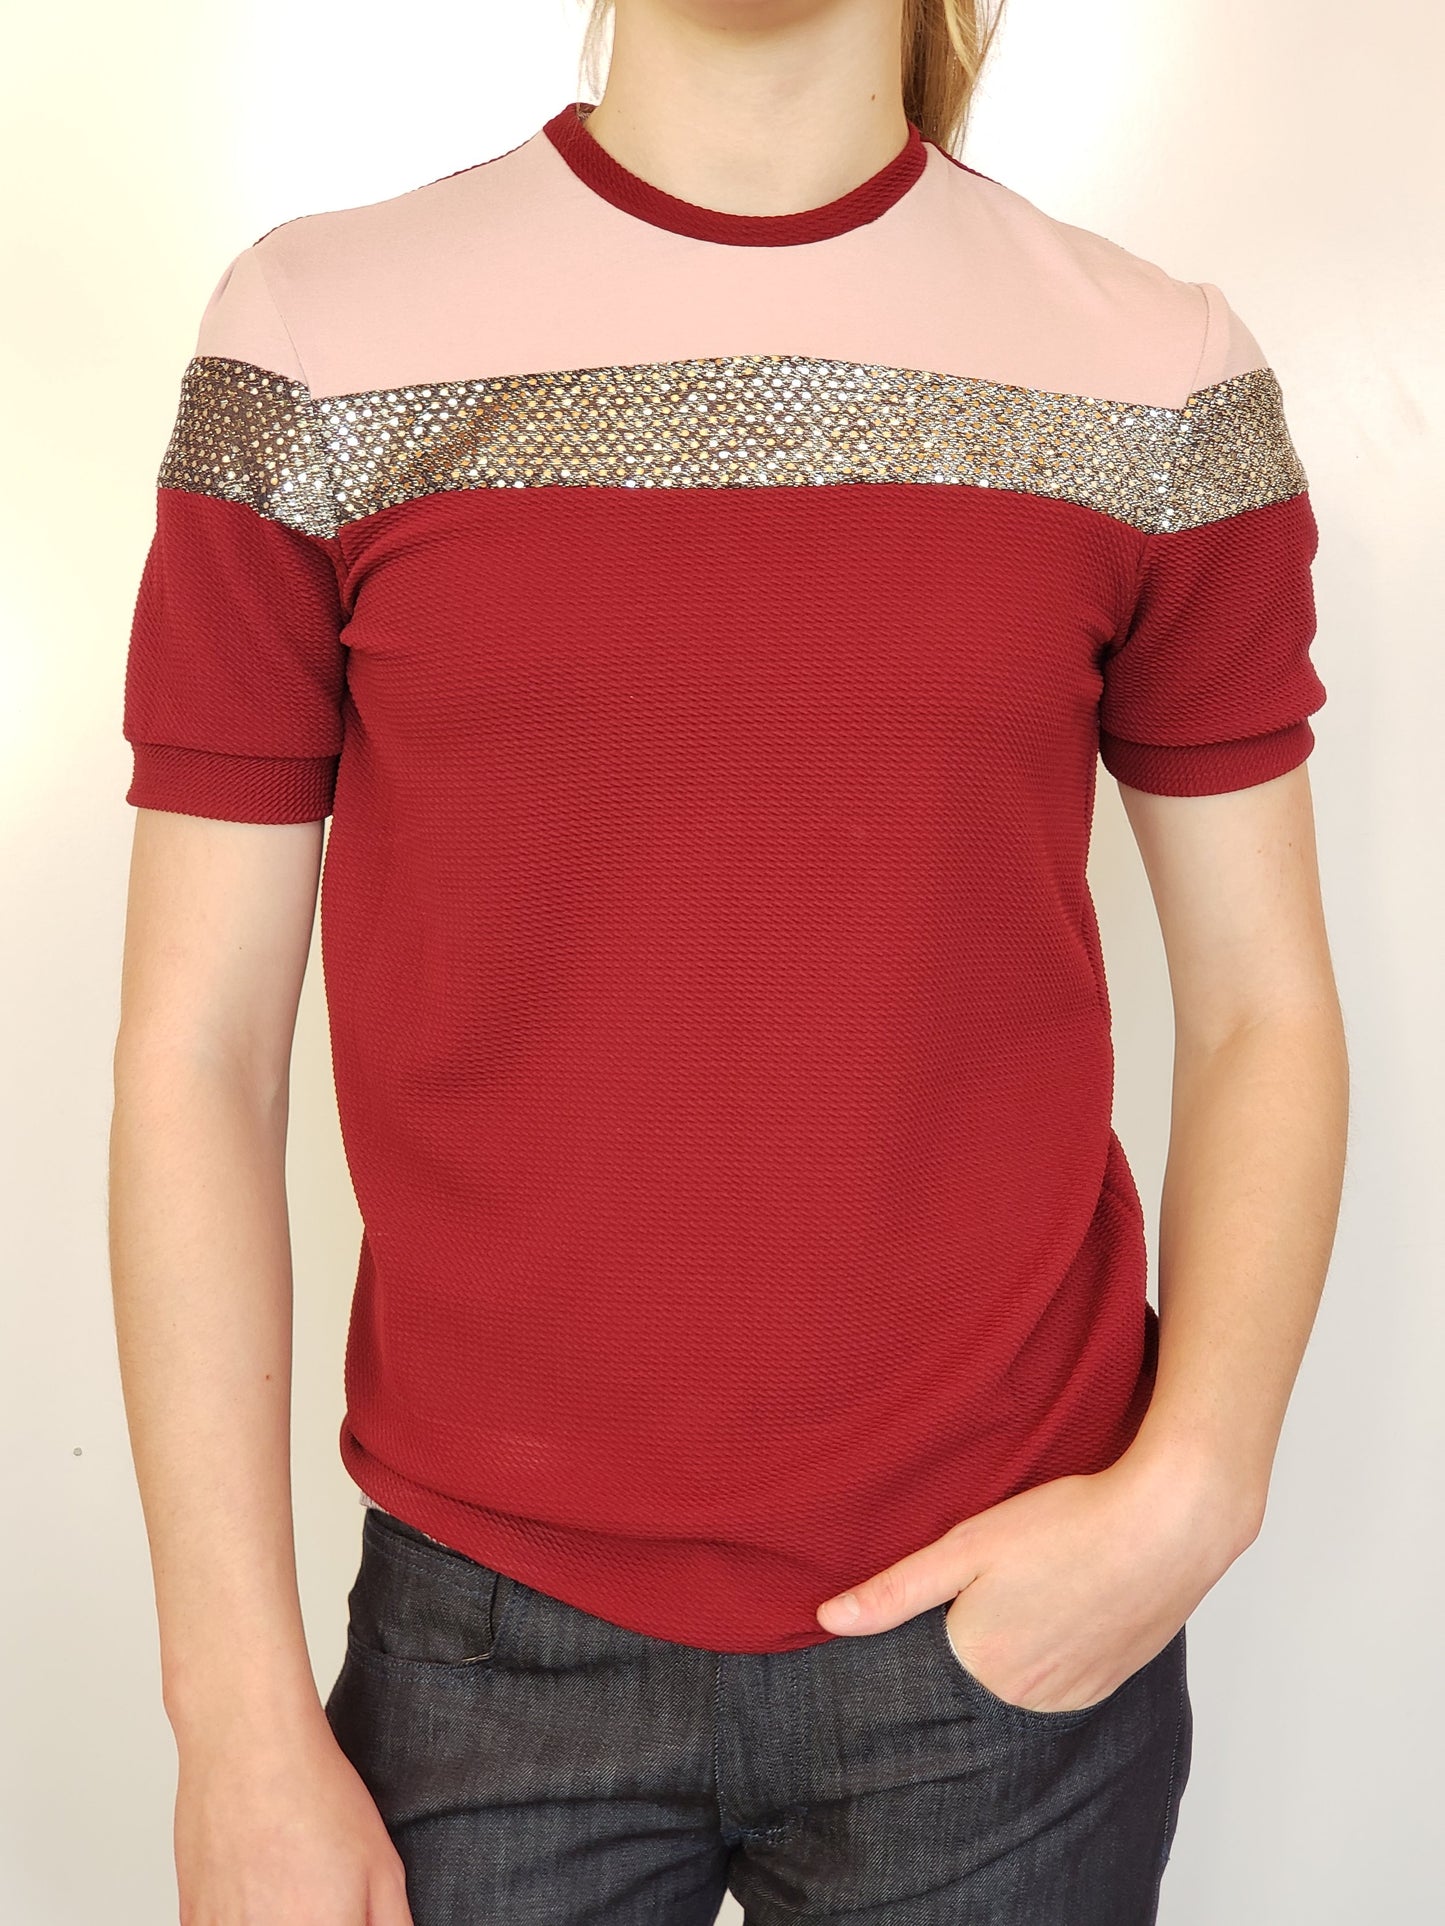 Vintage-inspired Knit T-Shirts